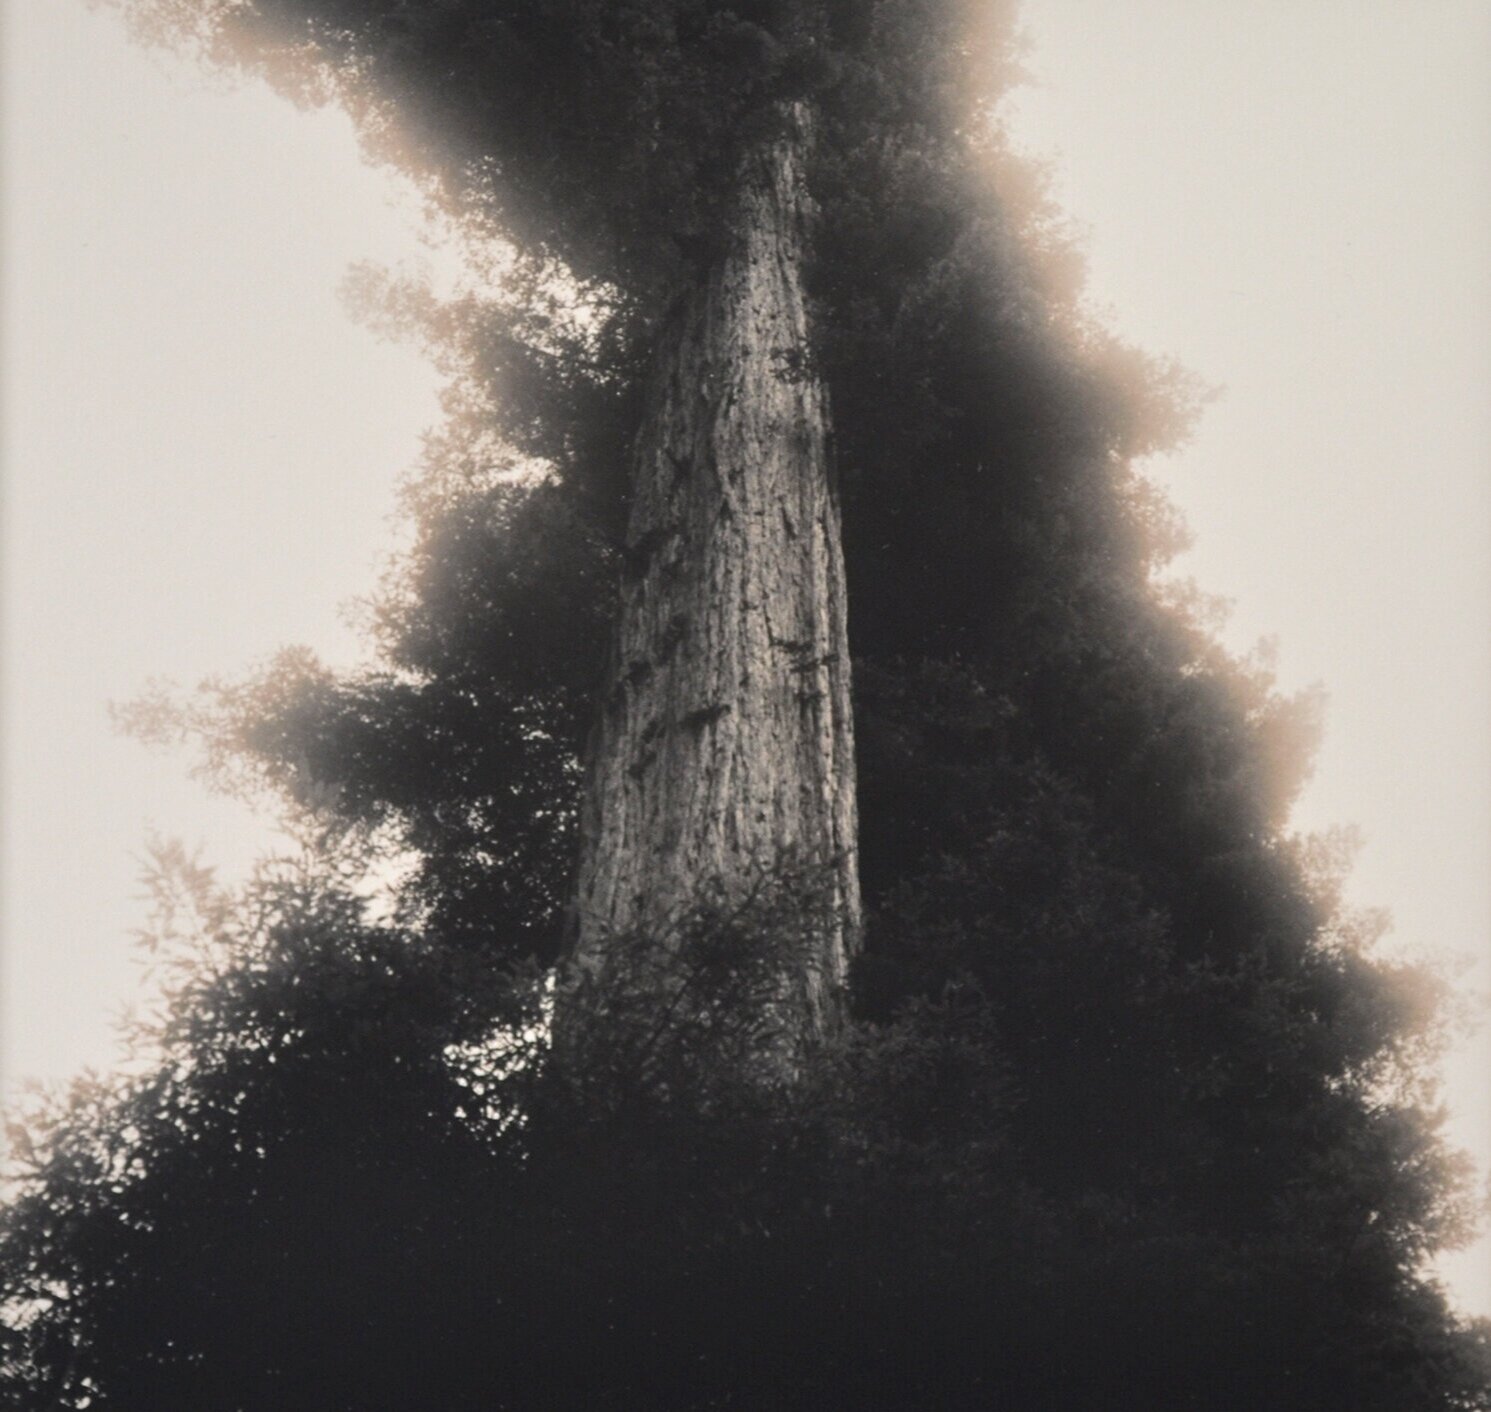 Ching - The Well: Redwood, California, 1976